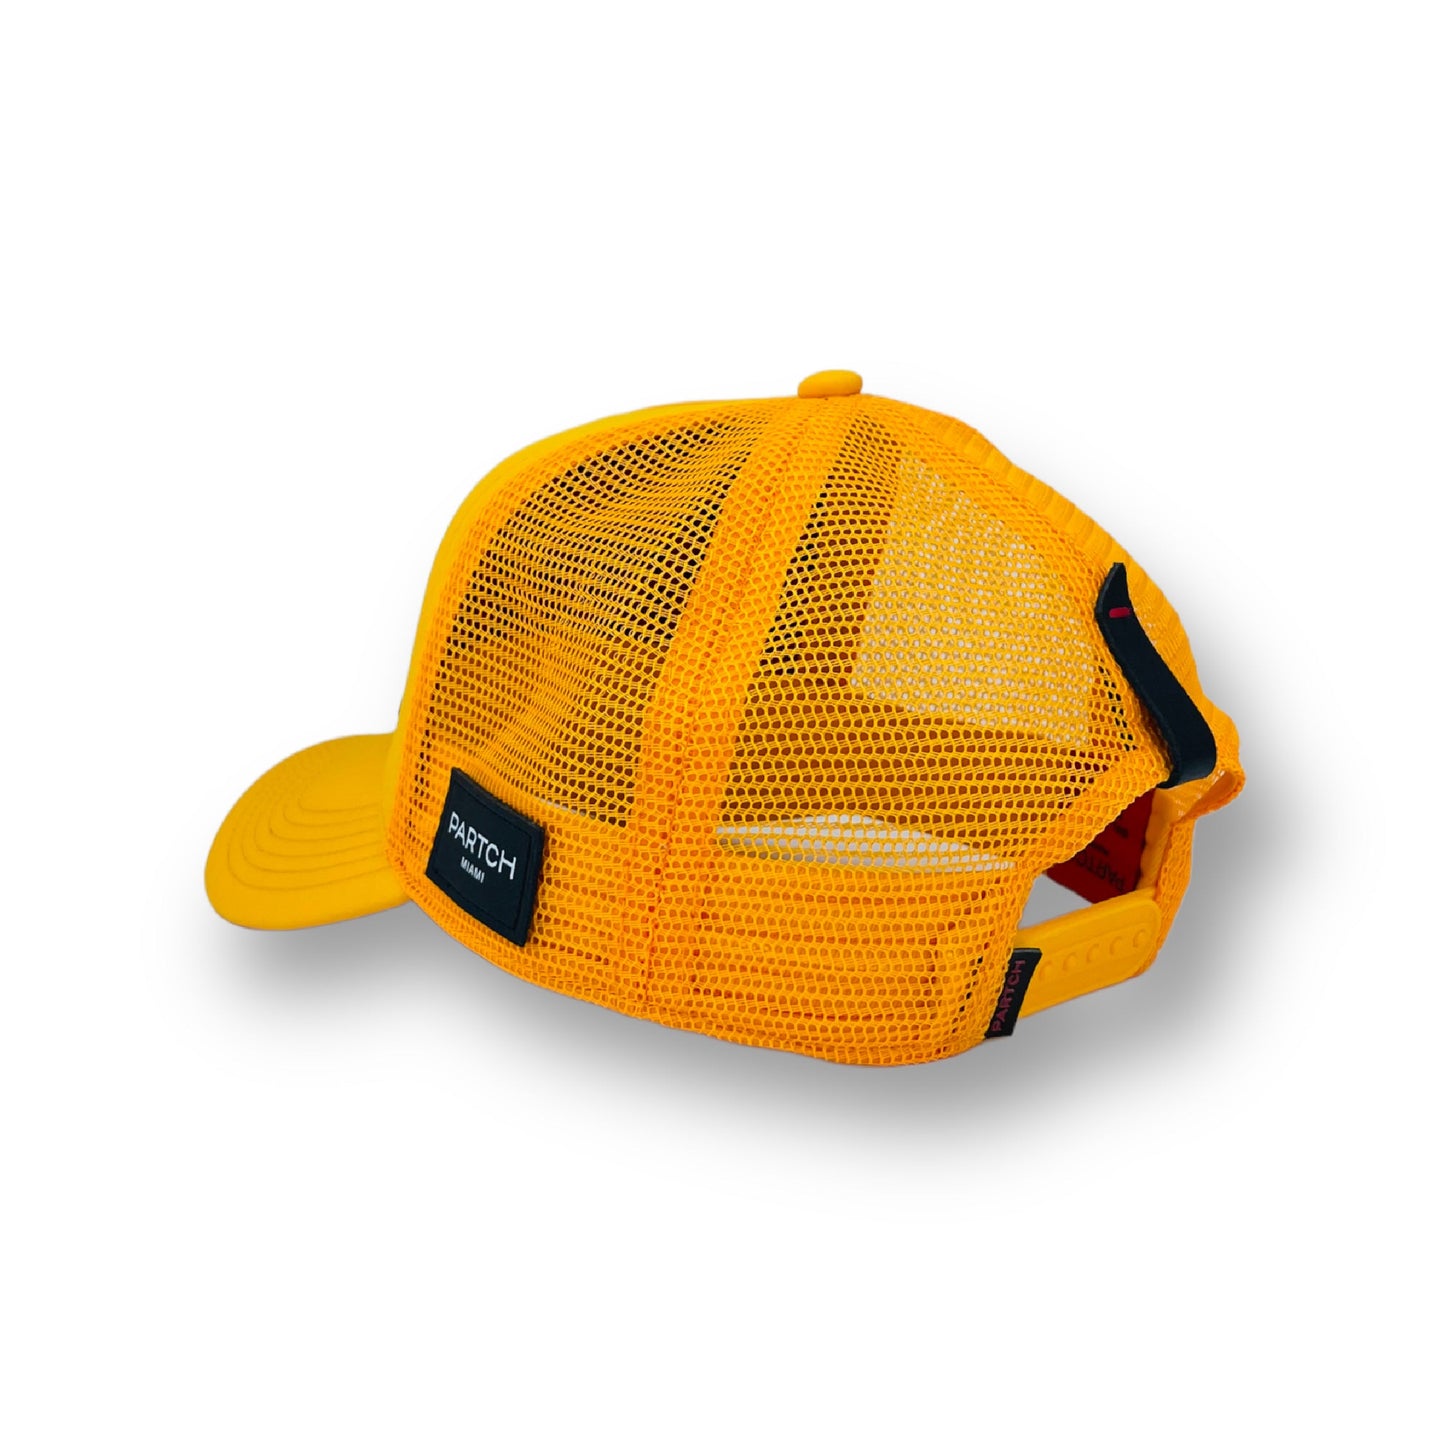 Yellow trucker hat with mesh and leather accents